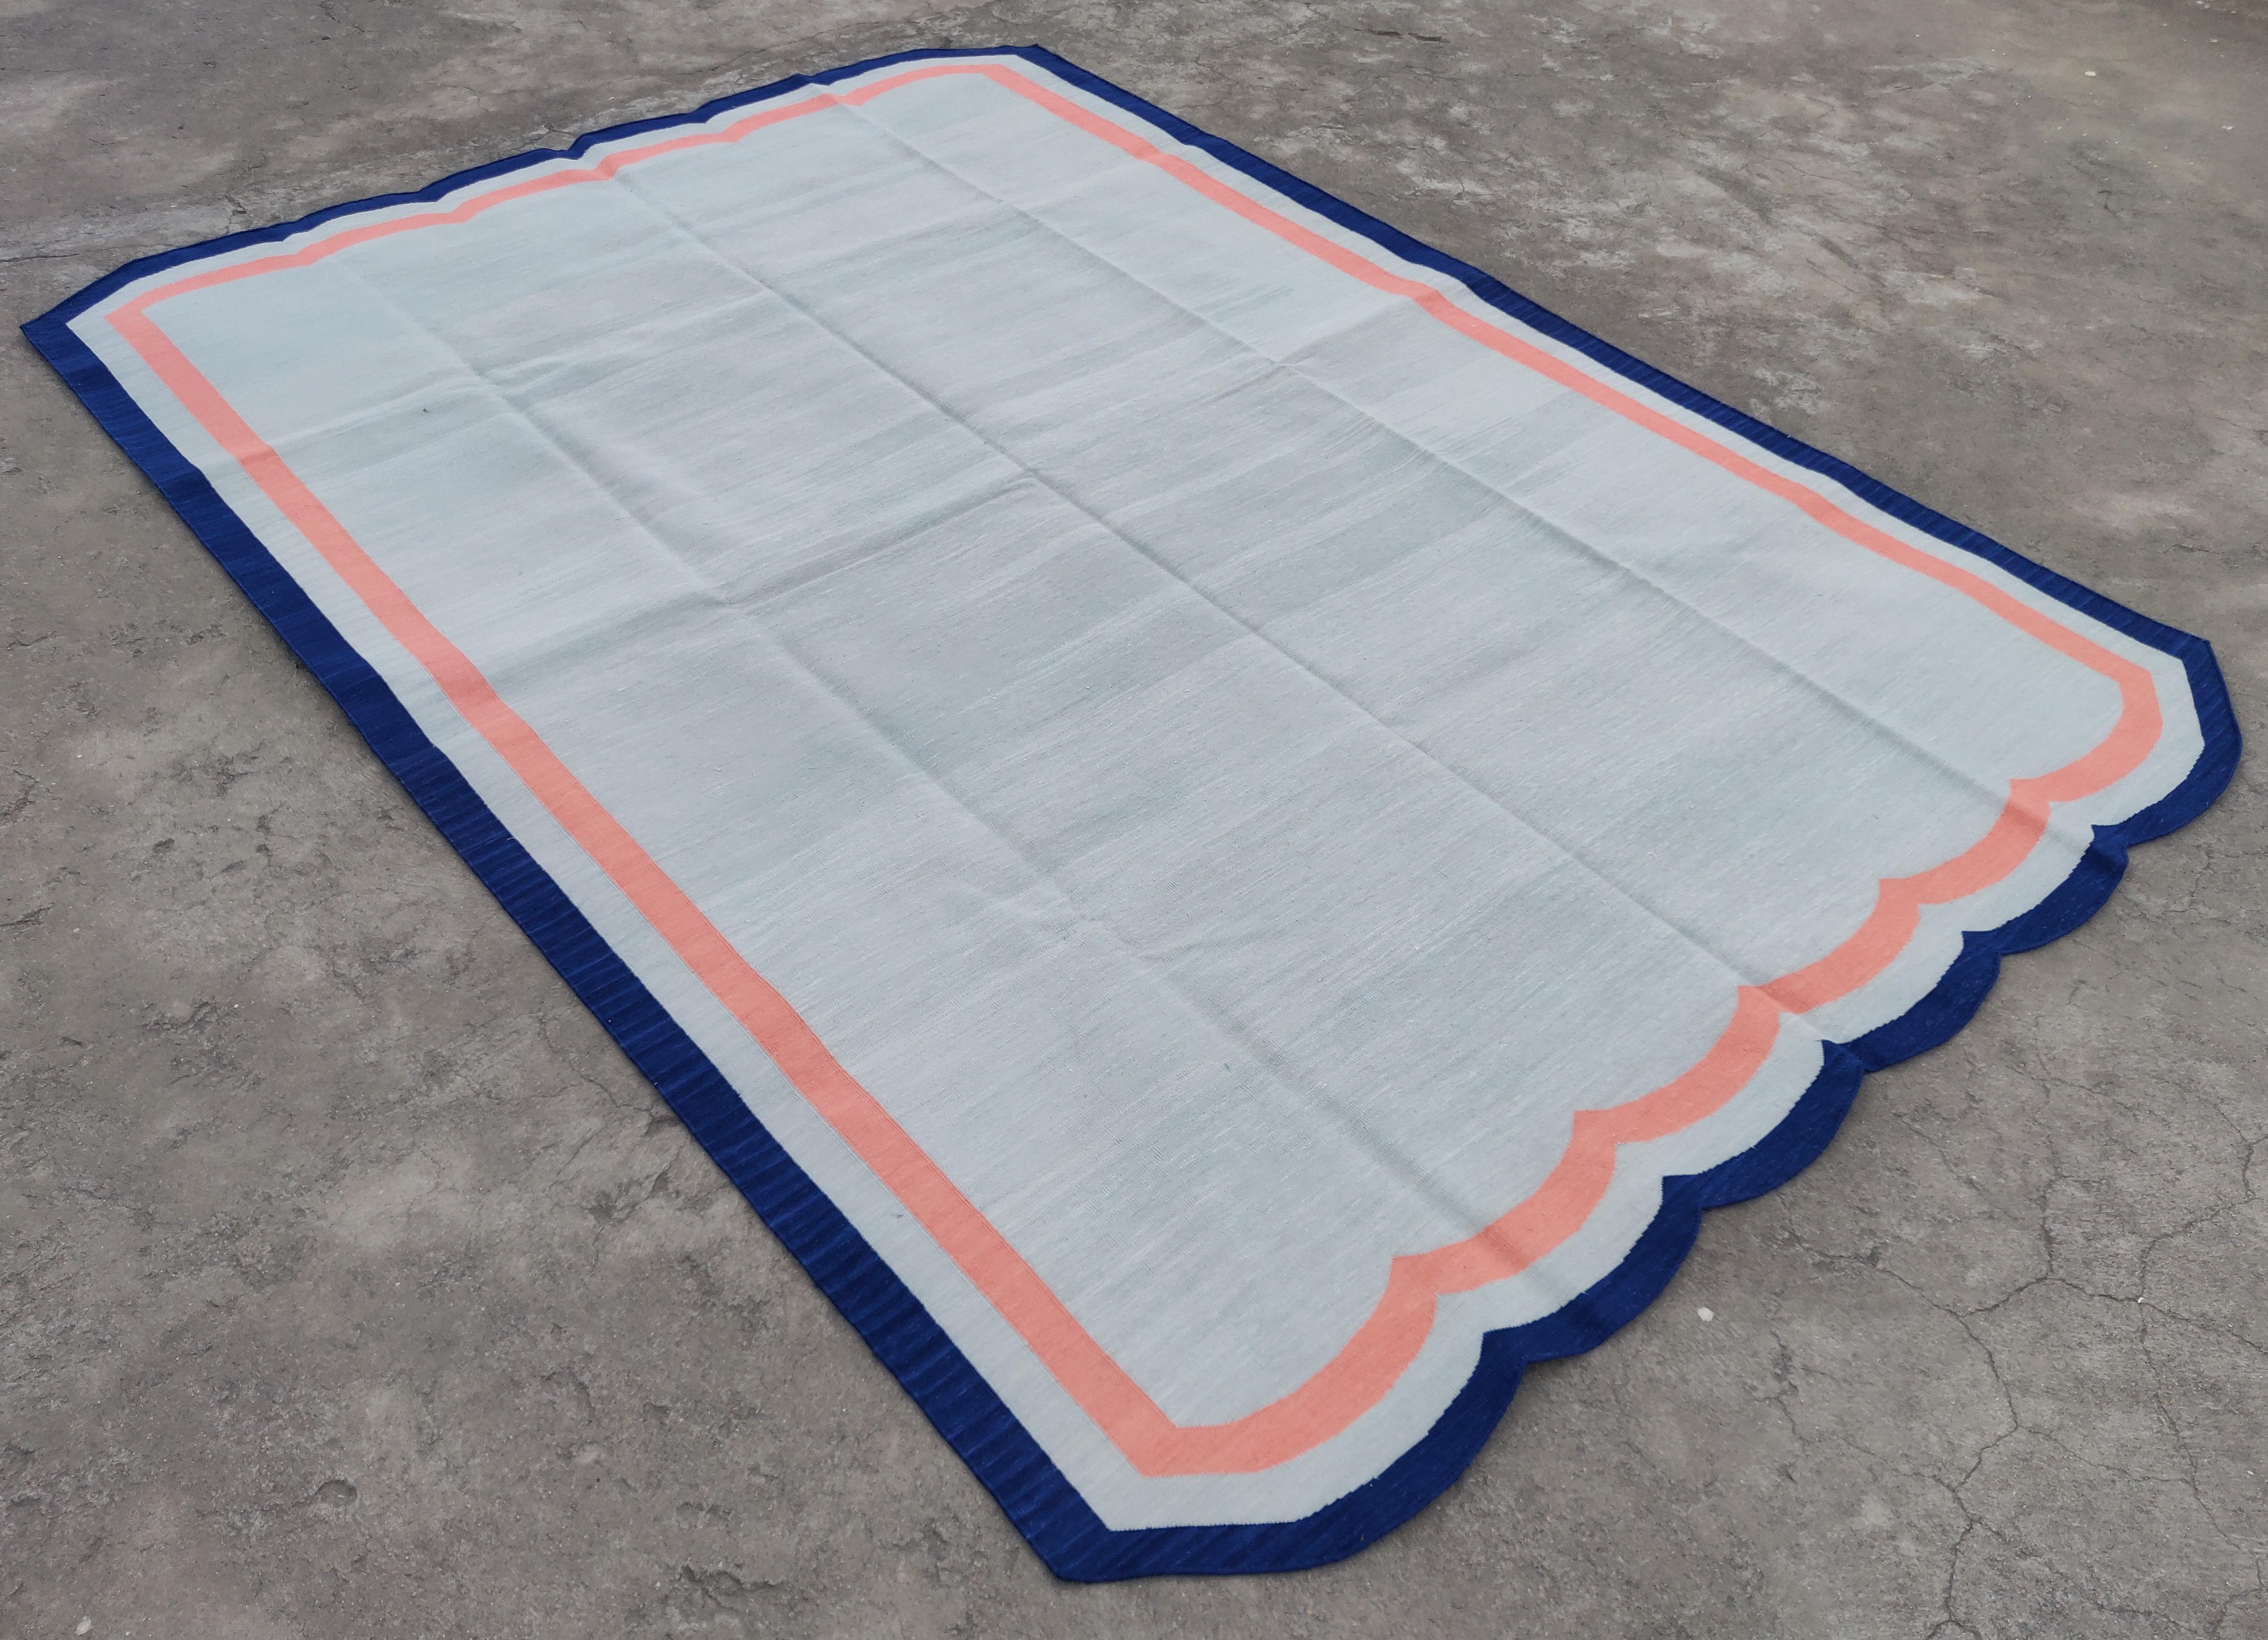 Cotton Vegetable Dyed Grey, Coral And Indigo Blue Scalloped Striped Indian Dhurrie Rug-6'x9' 
These special flat-weave dhurries are hand-woven with 15 ply 100% cotton yarn. Due to the special manufacturing techniques used to create our rugs, the